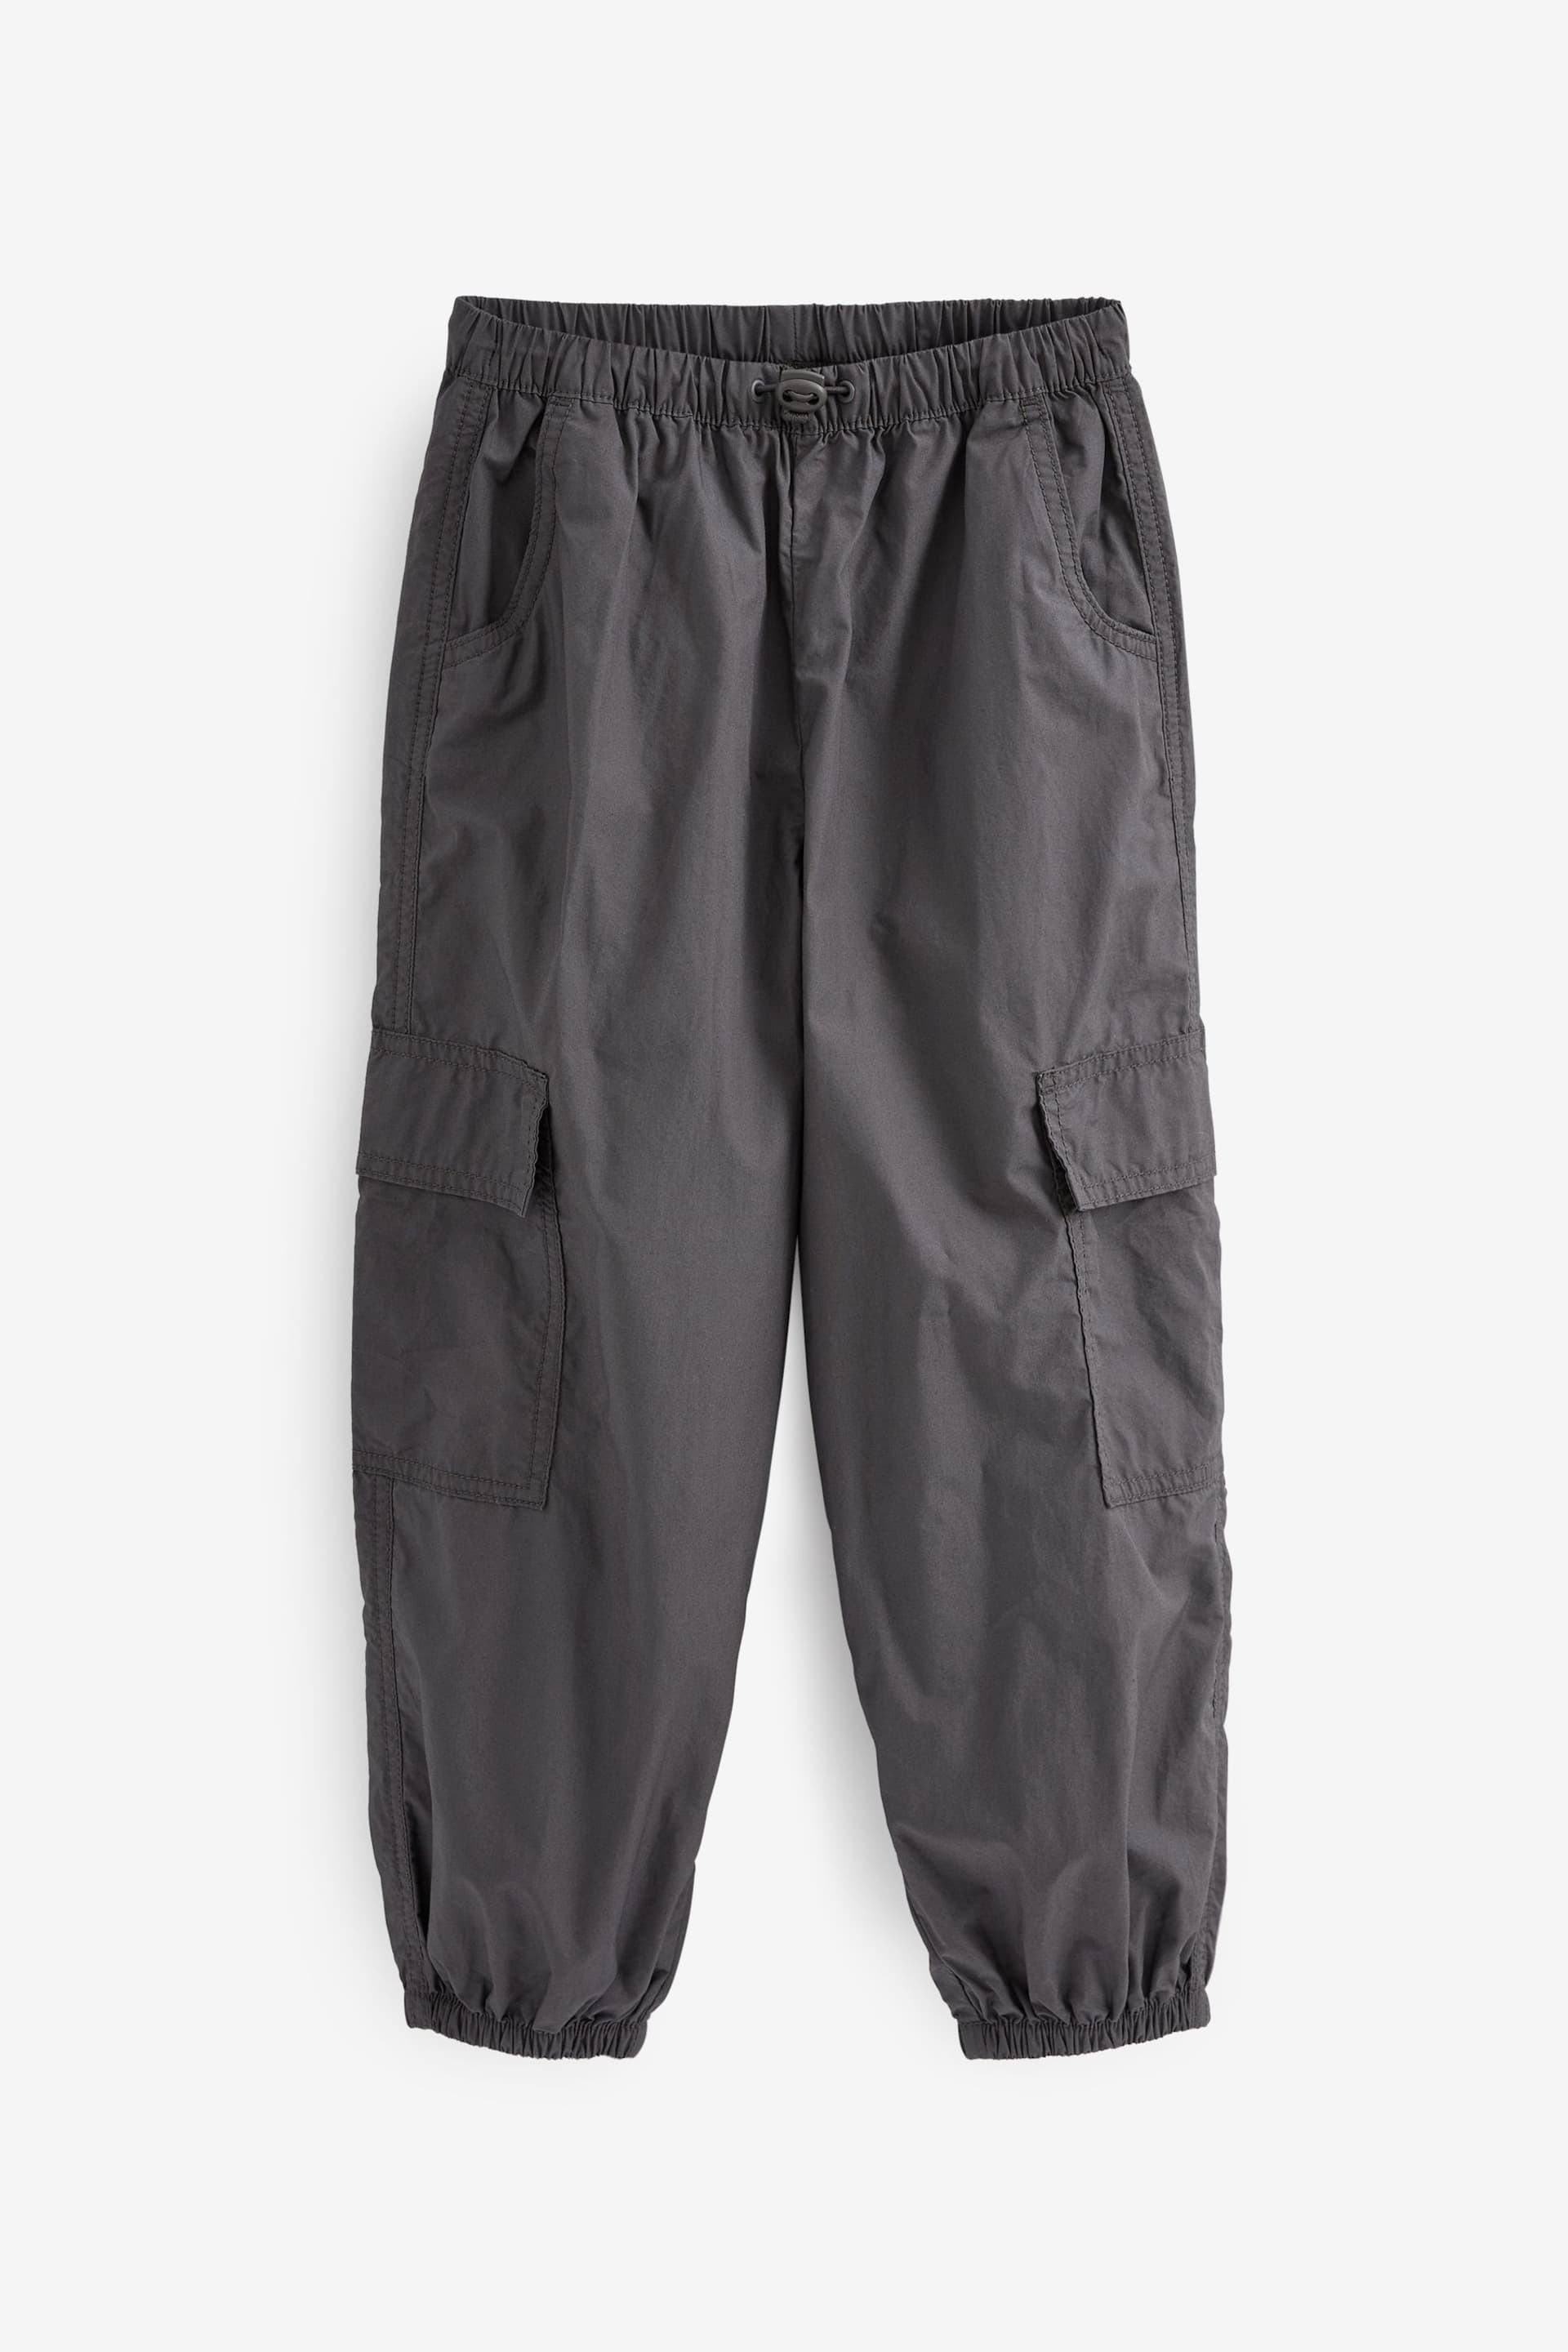 Charcoal Grey Parachute Cargo Cuffed Trousers (3-16yrs) - Image 8 of 9